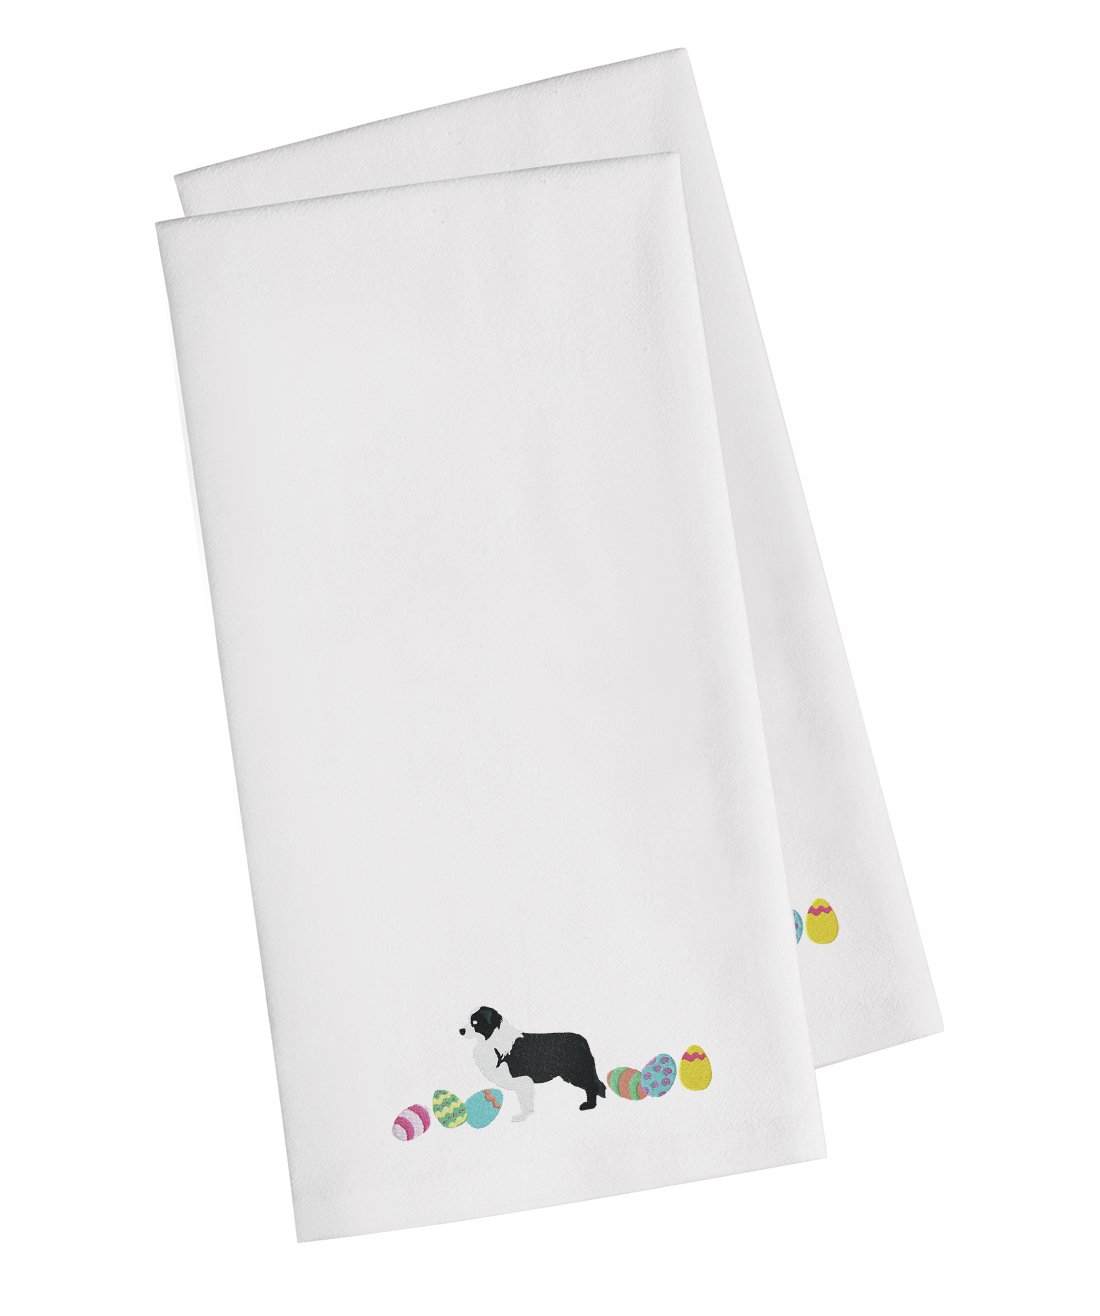 Black Border Collie Easter White Embroidered Kitchen Towel Set of 2 CK1610WHTWE by Caroline's Treasures